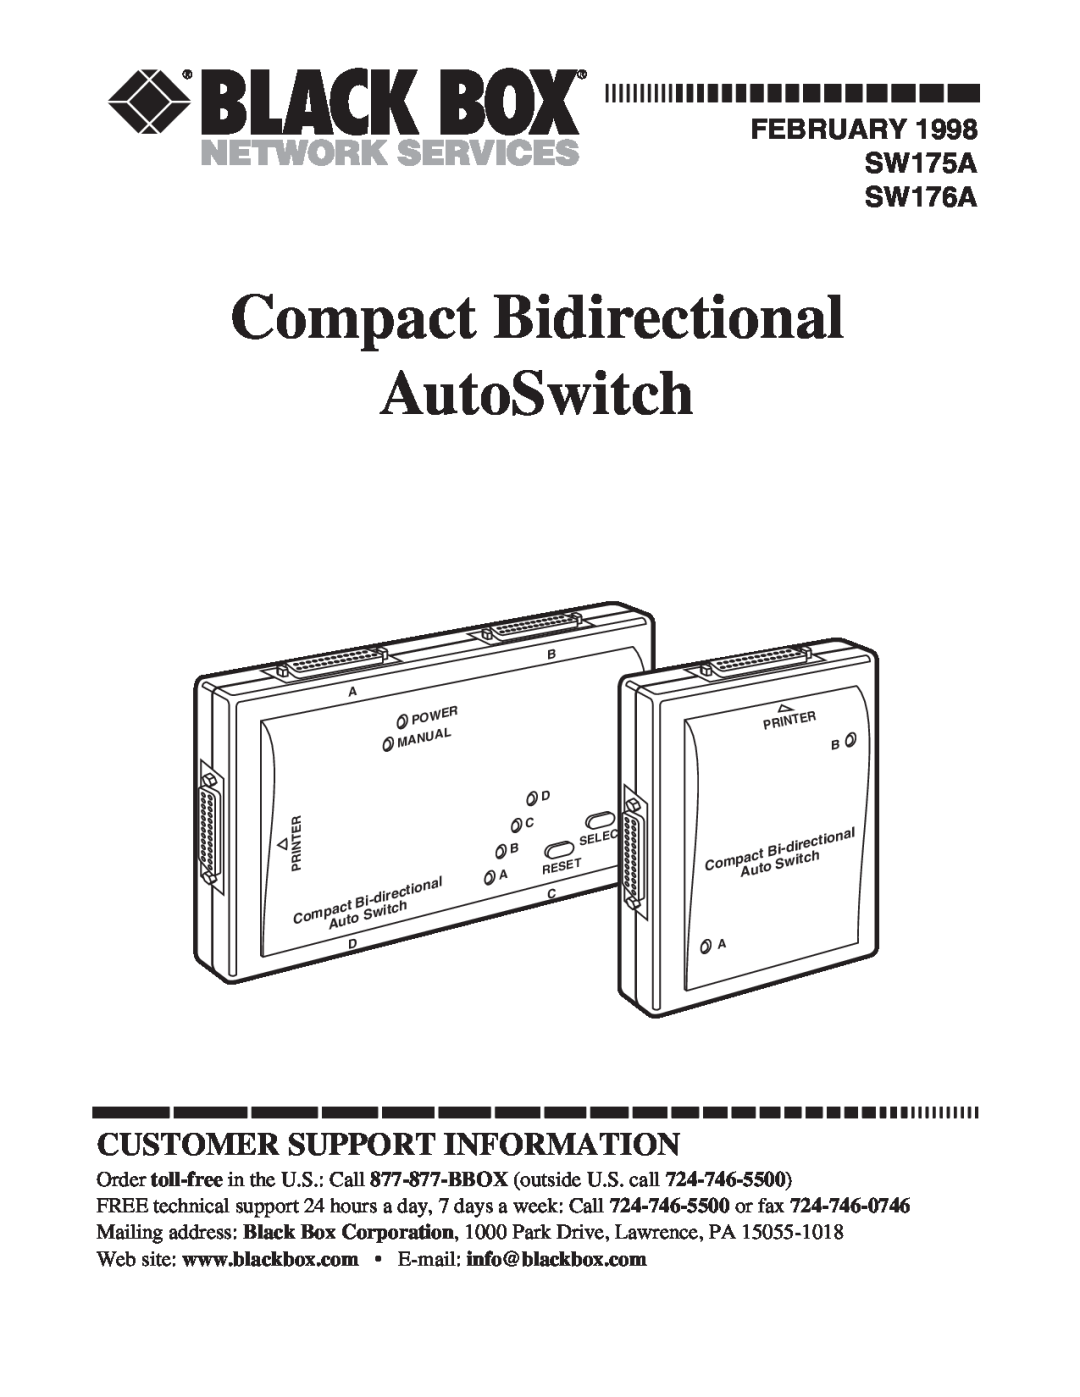 Black Box manual Compact Bidirectional AutoSwitch, Customer Support Information, FEBRUARY SW175A SW176A 